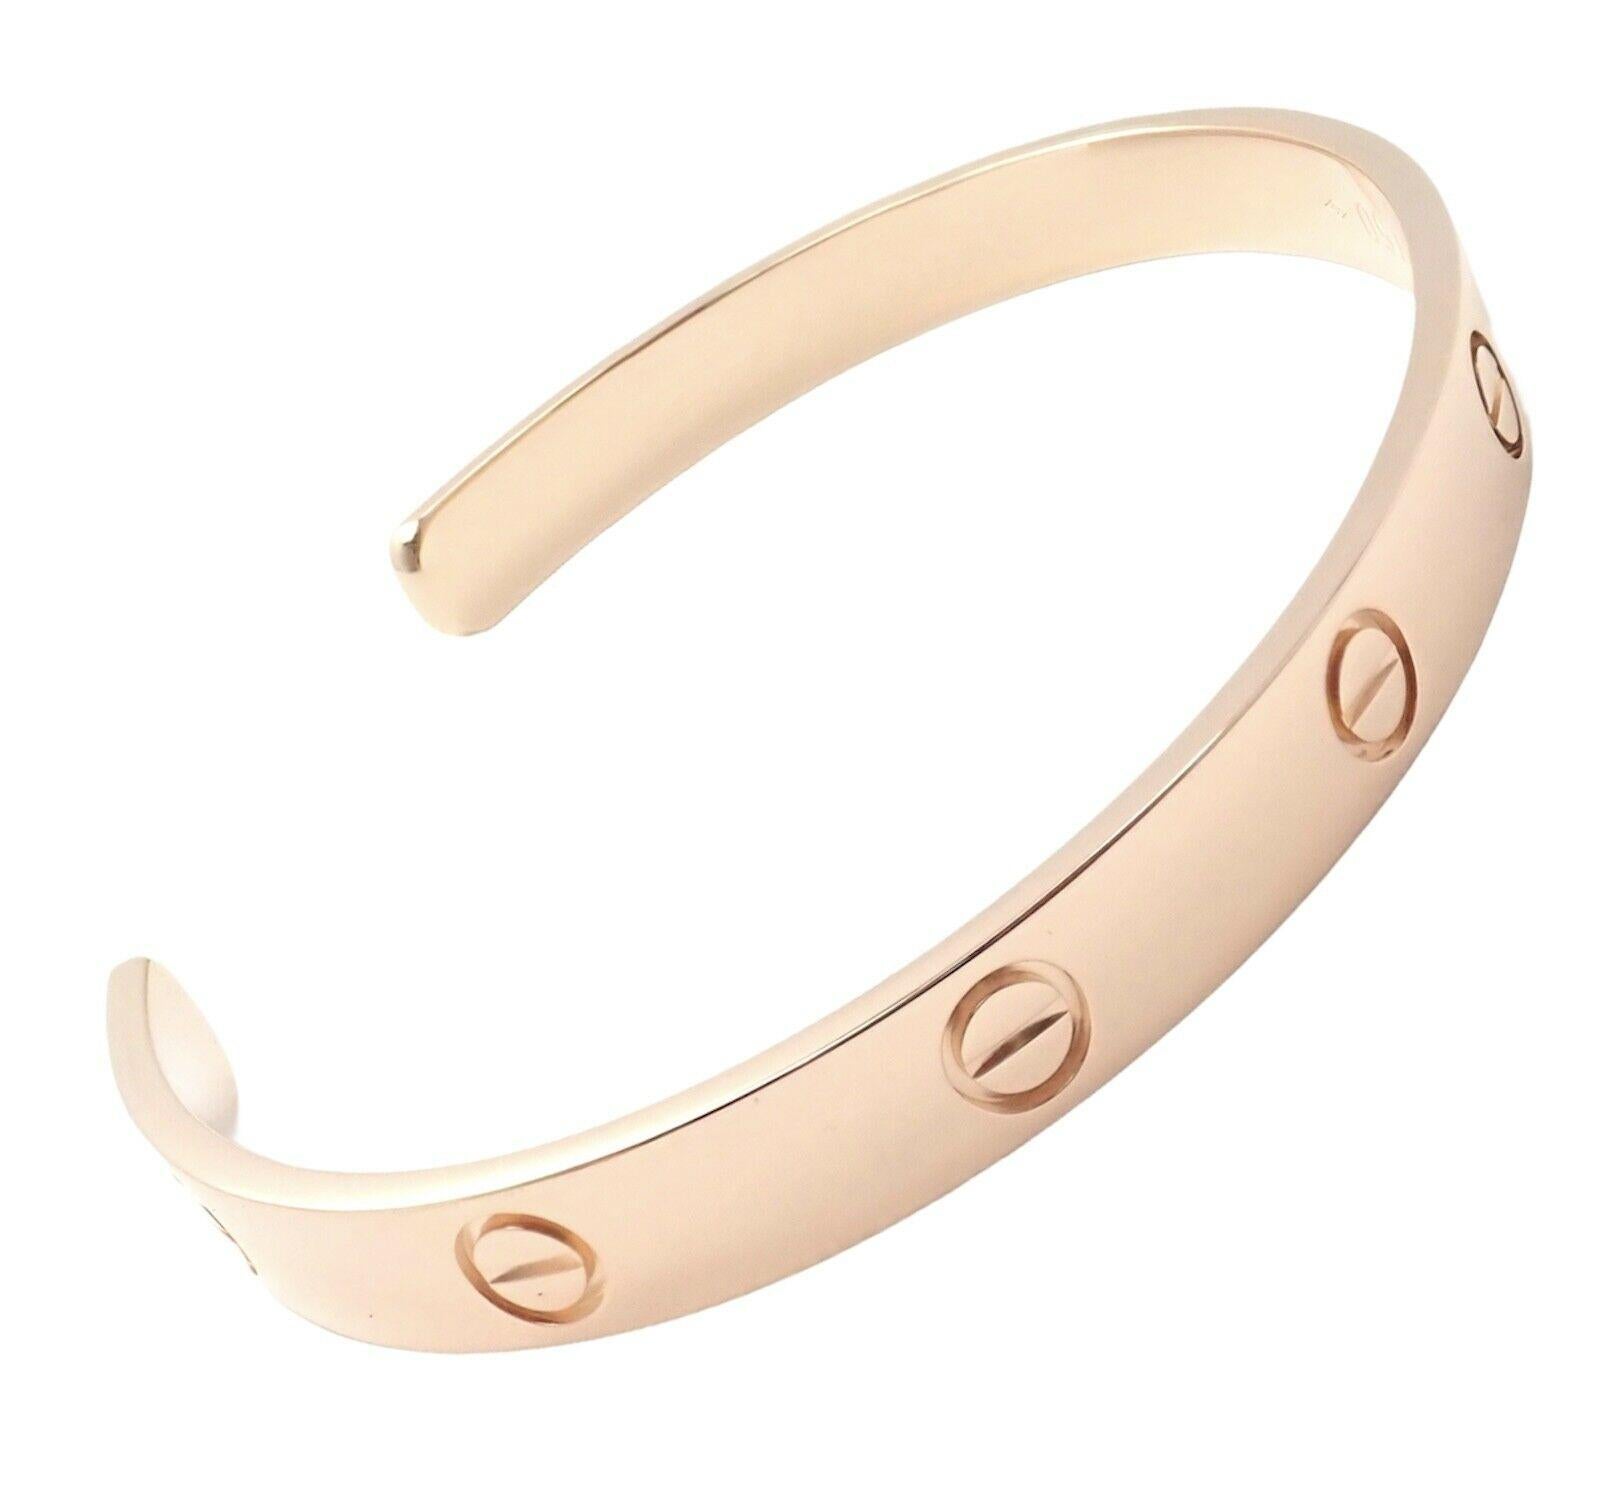 18k Rose Gold Cartier Love Open Cuff Bangle Bracelet. Size 19.
Details:
Length: 19cm
Weight: 24.7 grams
Width: 6.5mm
Hallmarks: Cartier 19 EZ(*serial omitted*) AU750 
*Free Shipping within the United States*
YOUR PRICE: $4,350
Ti643tedd